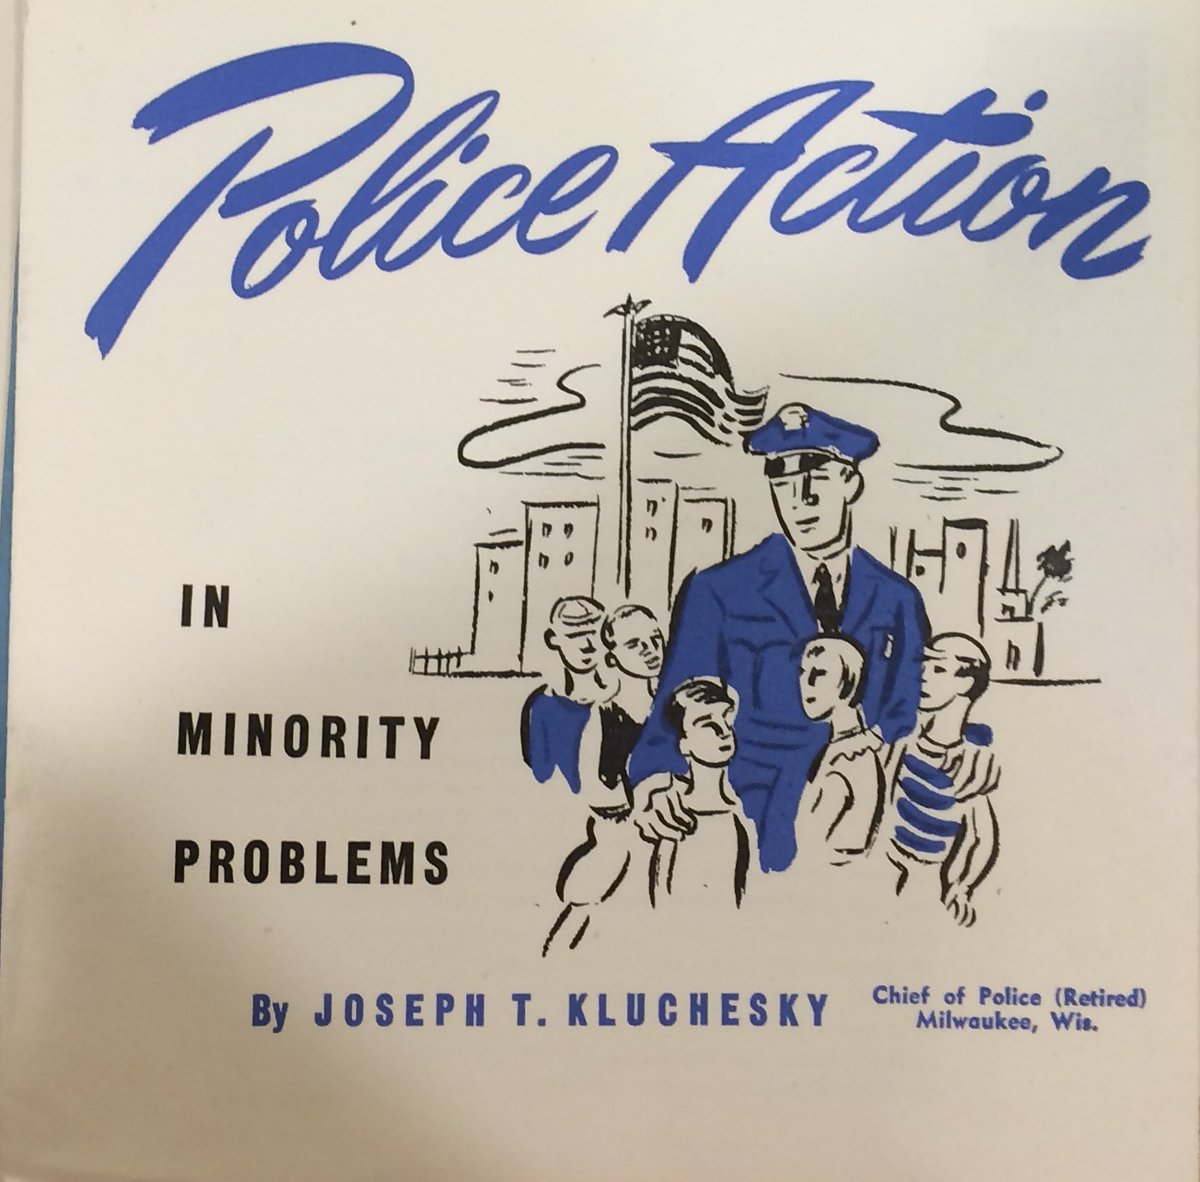 The Minneapolis Police Department's record of racism and police brutality has a long history. In 1945, Minneapolis mayor Hubert Humphrey tried to reform the MPD through "education." Here's a pamphlet sent to the entire MPD in 1946 encouraging police to "discuss" race. (thread) 1/